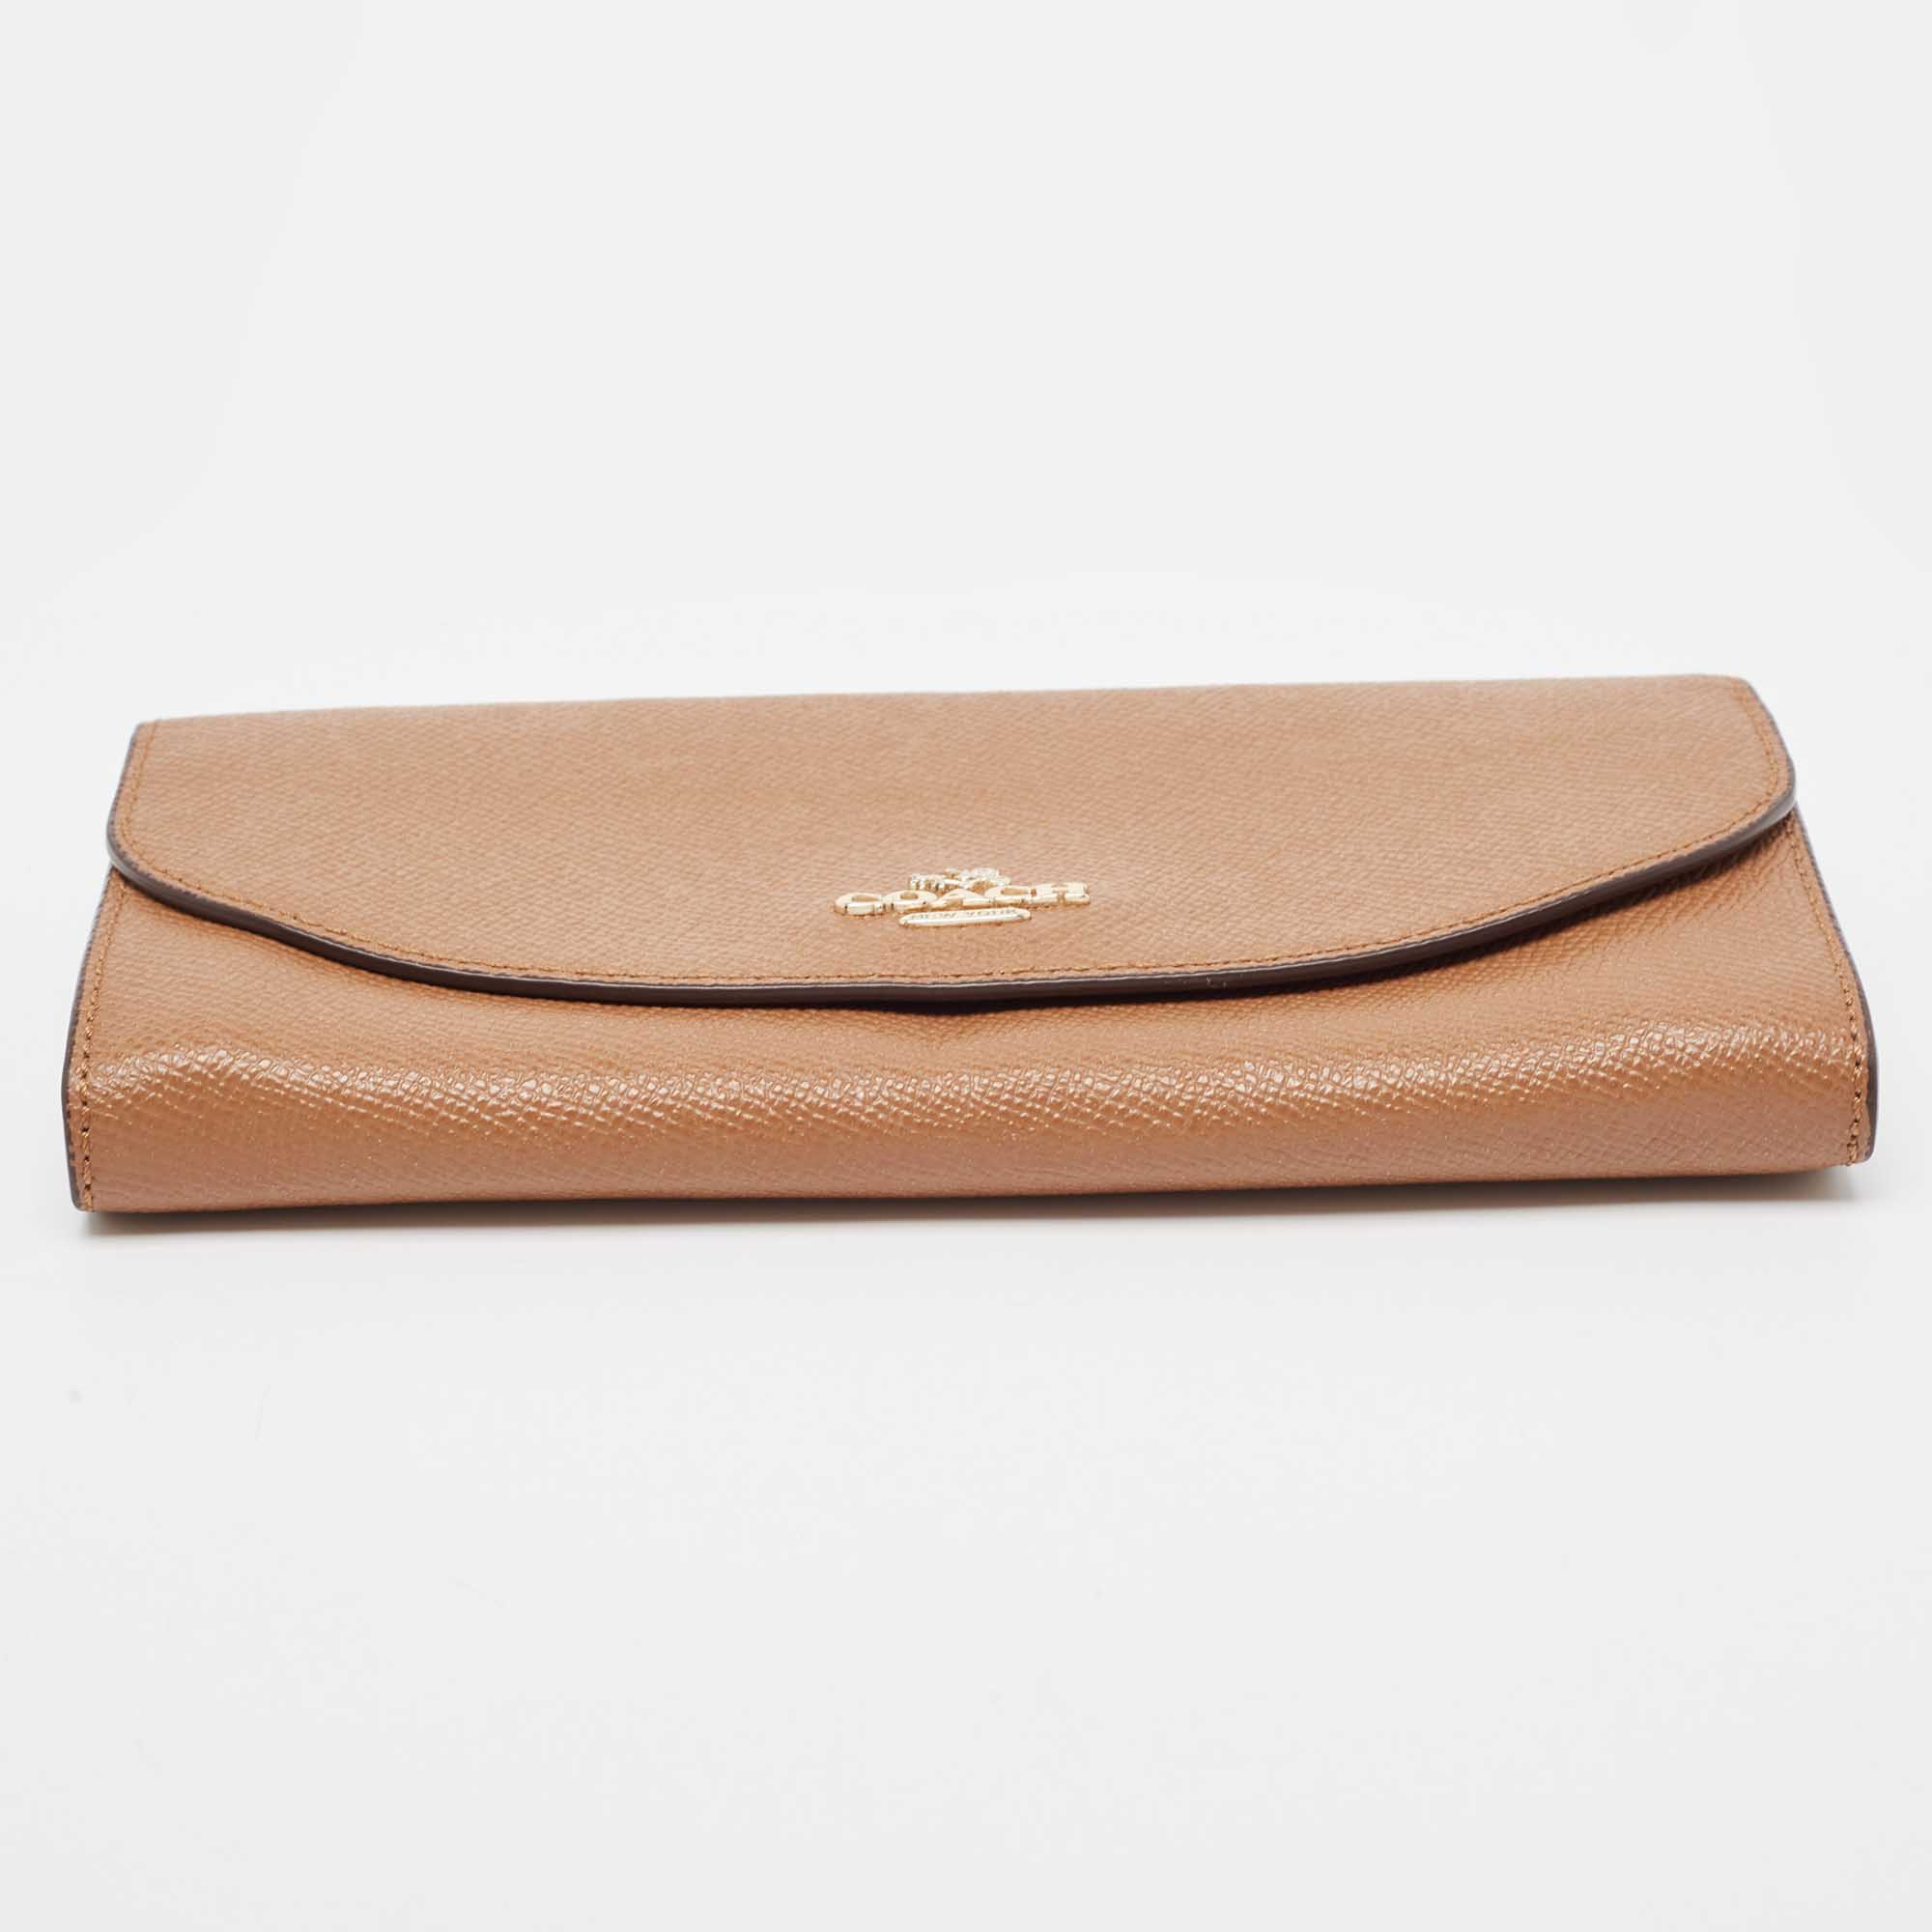 Coach Brown Leather Flap Continental Wallet